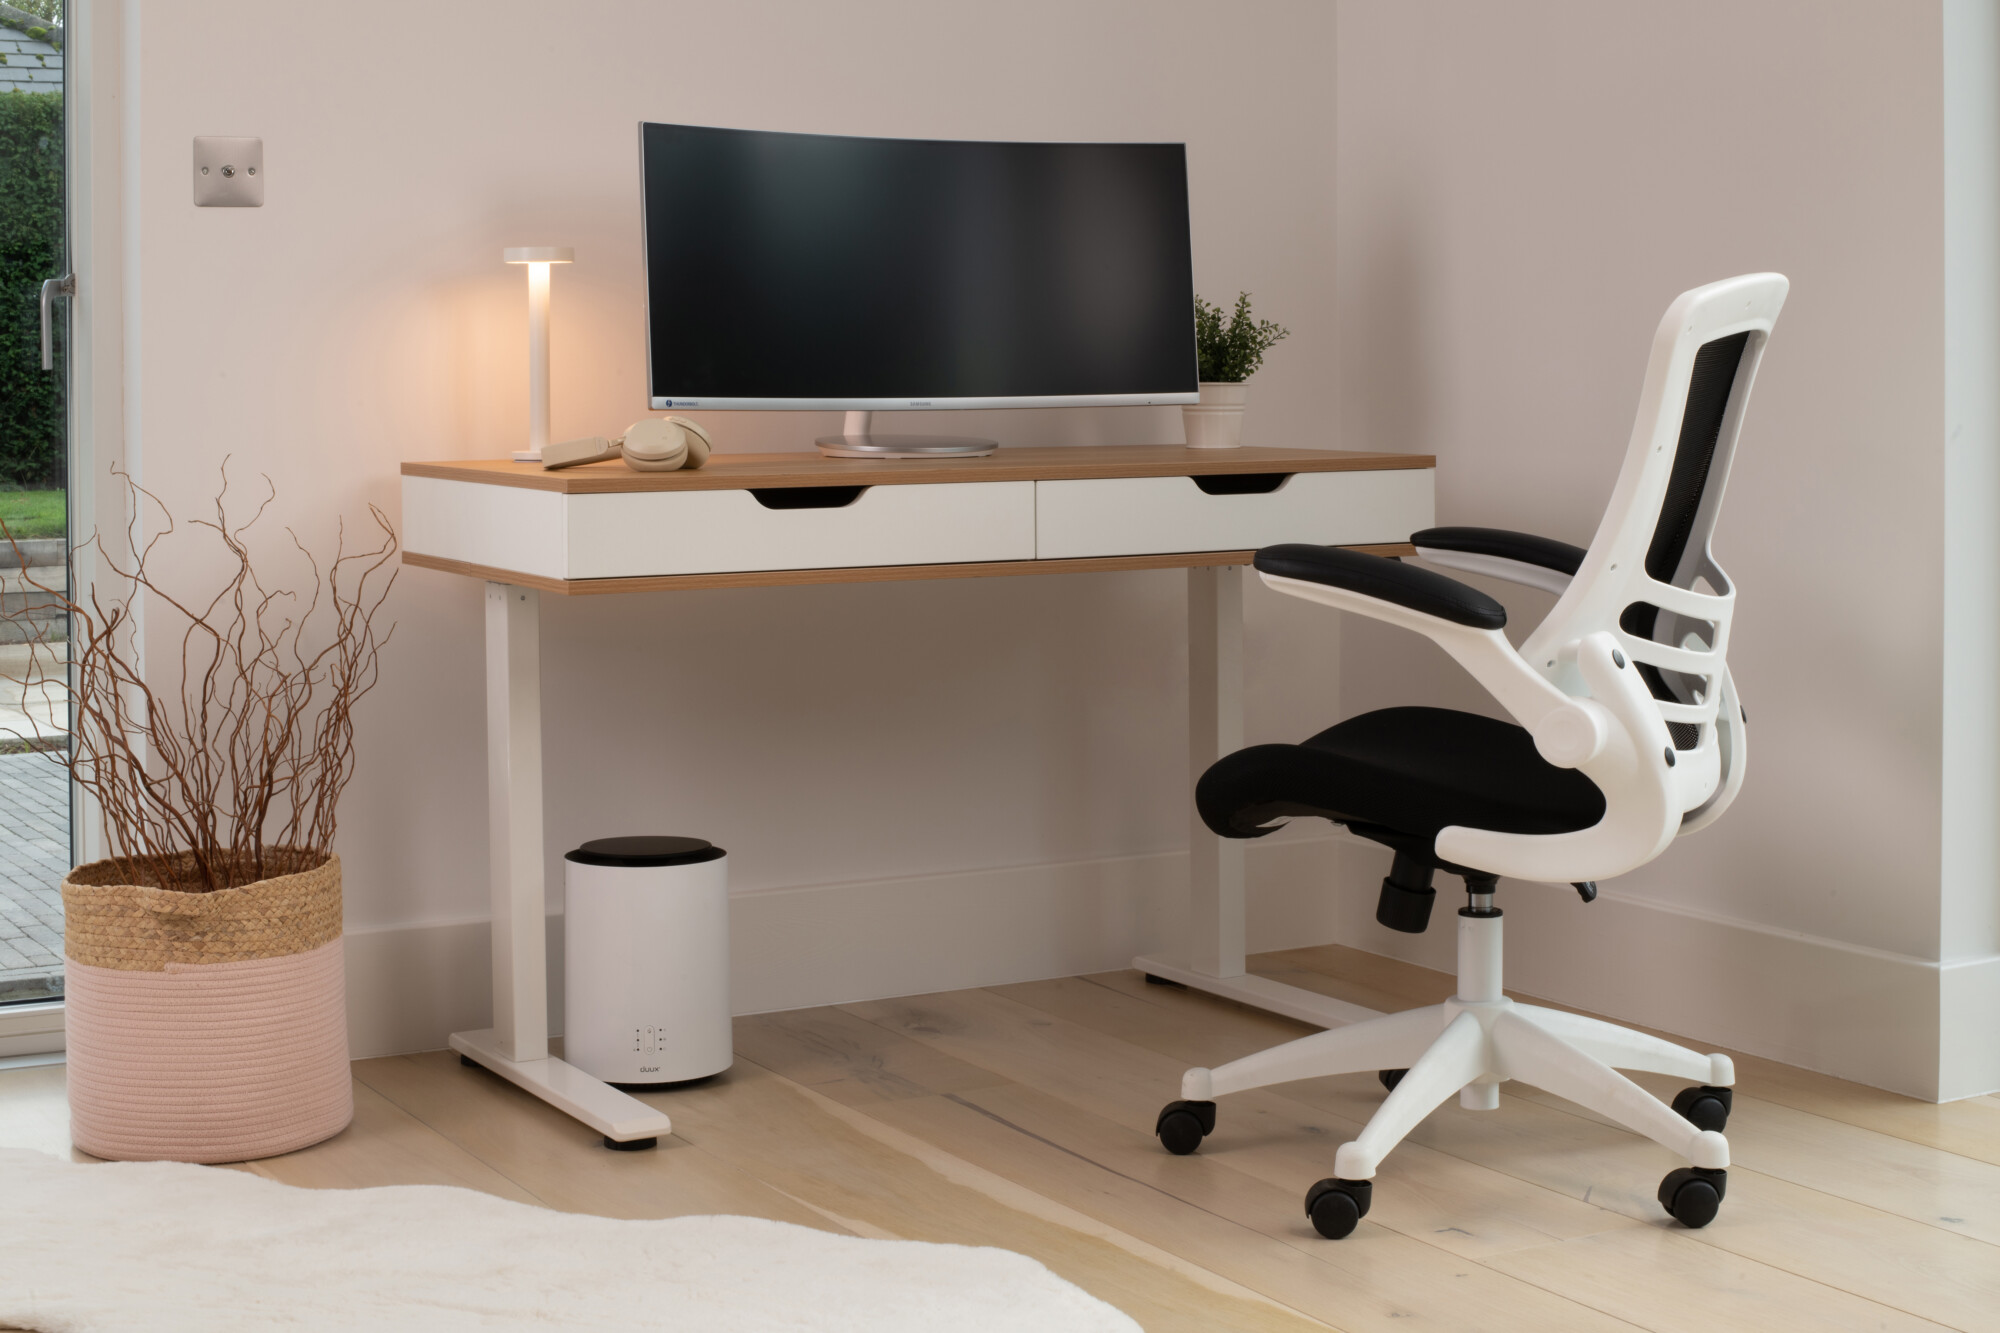 Sit or stand at your chosen height from 75cm to 125cm. Technical features include 4 memory settings, 2 USB ports and 1 USB-C port. 